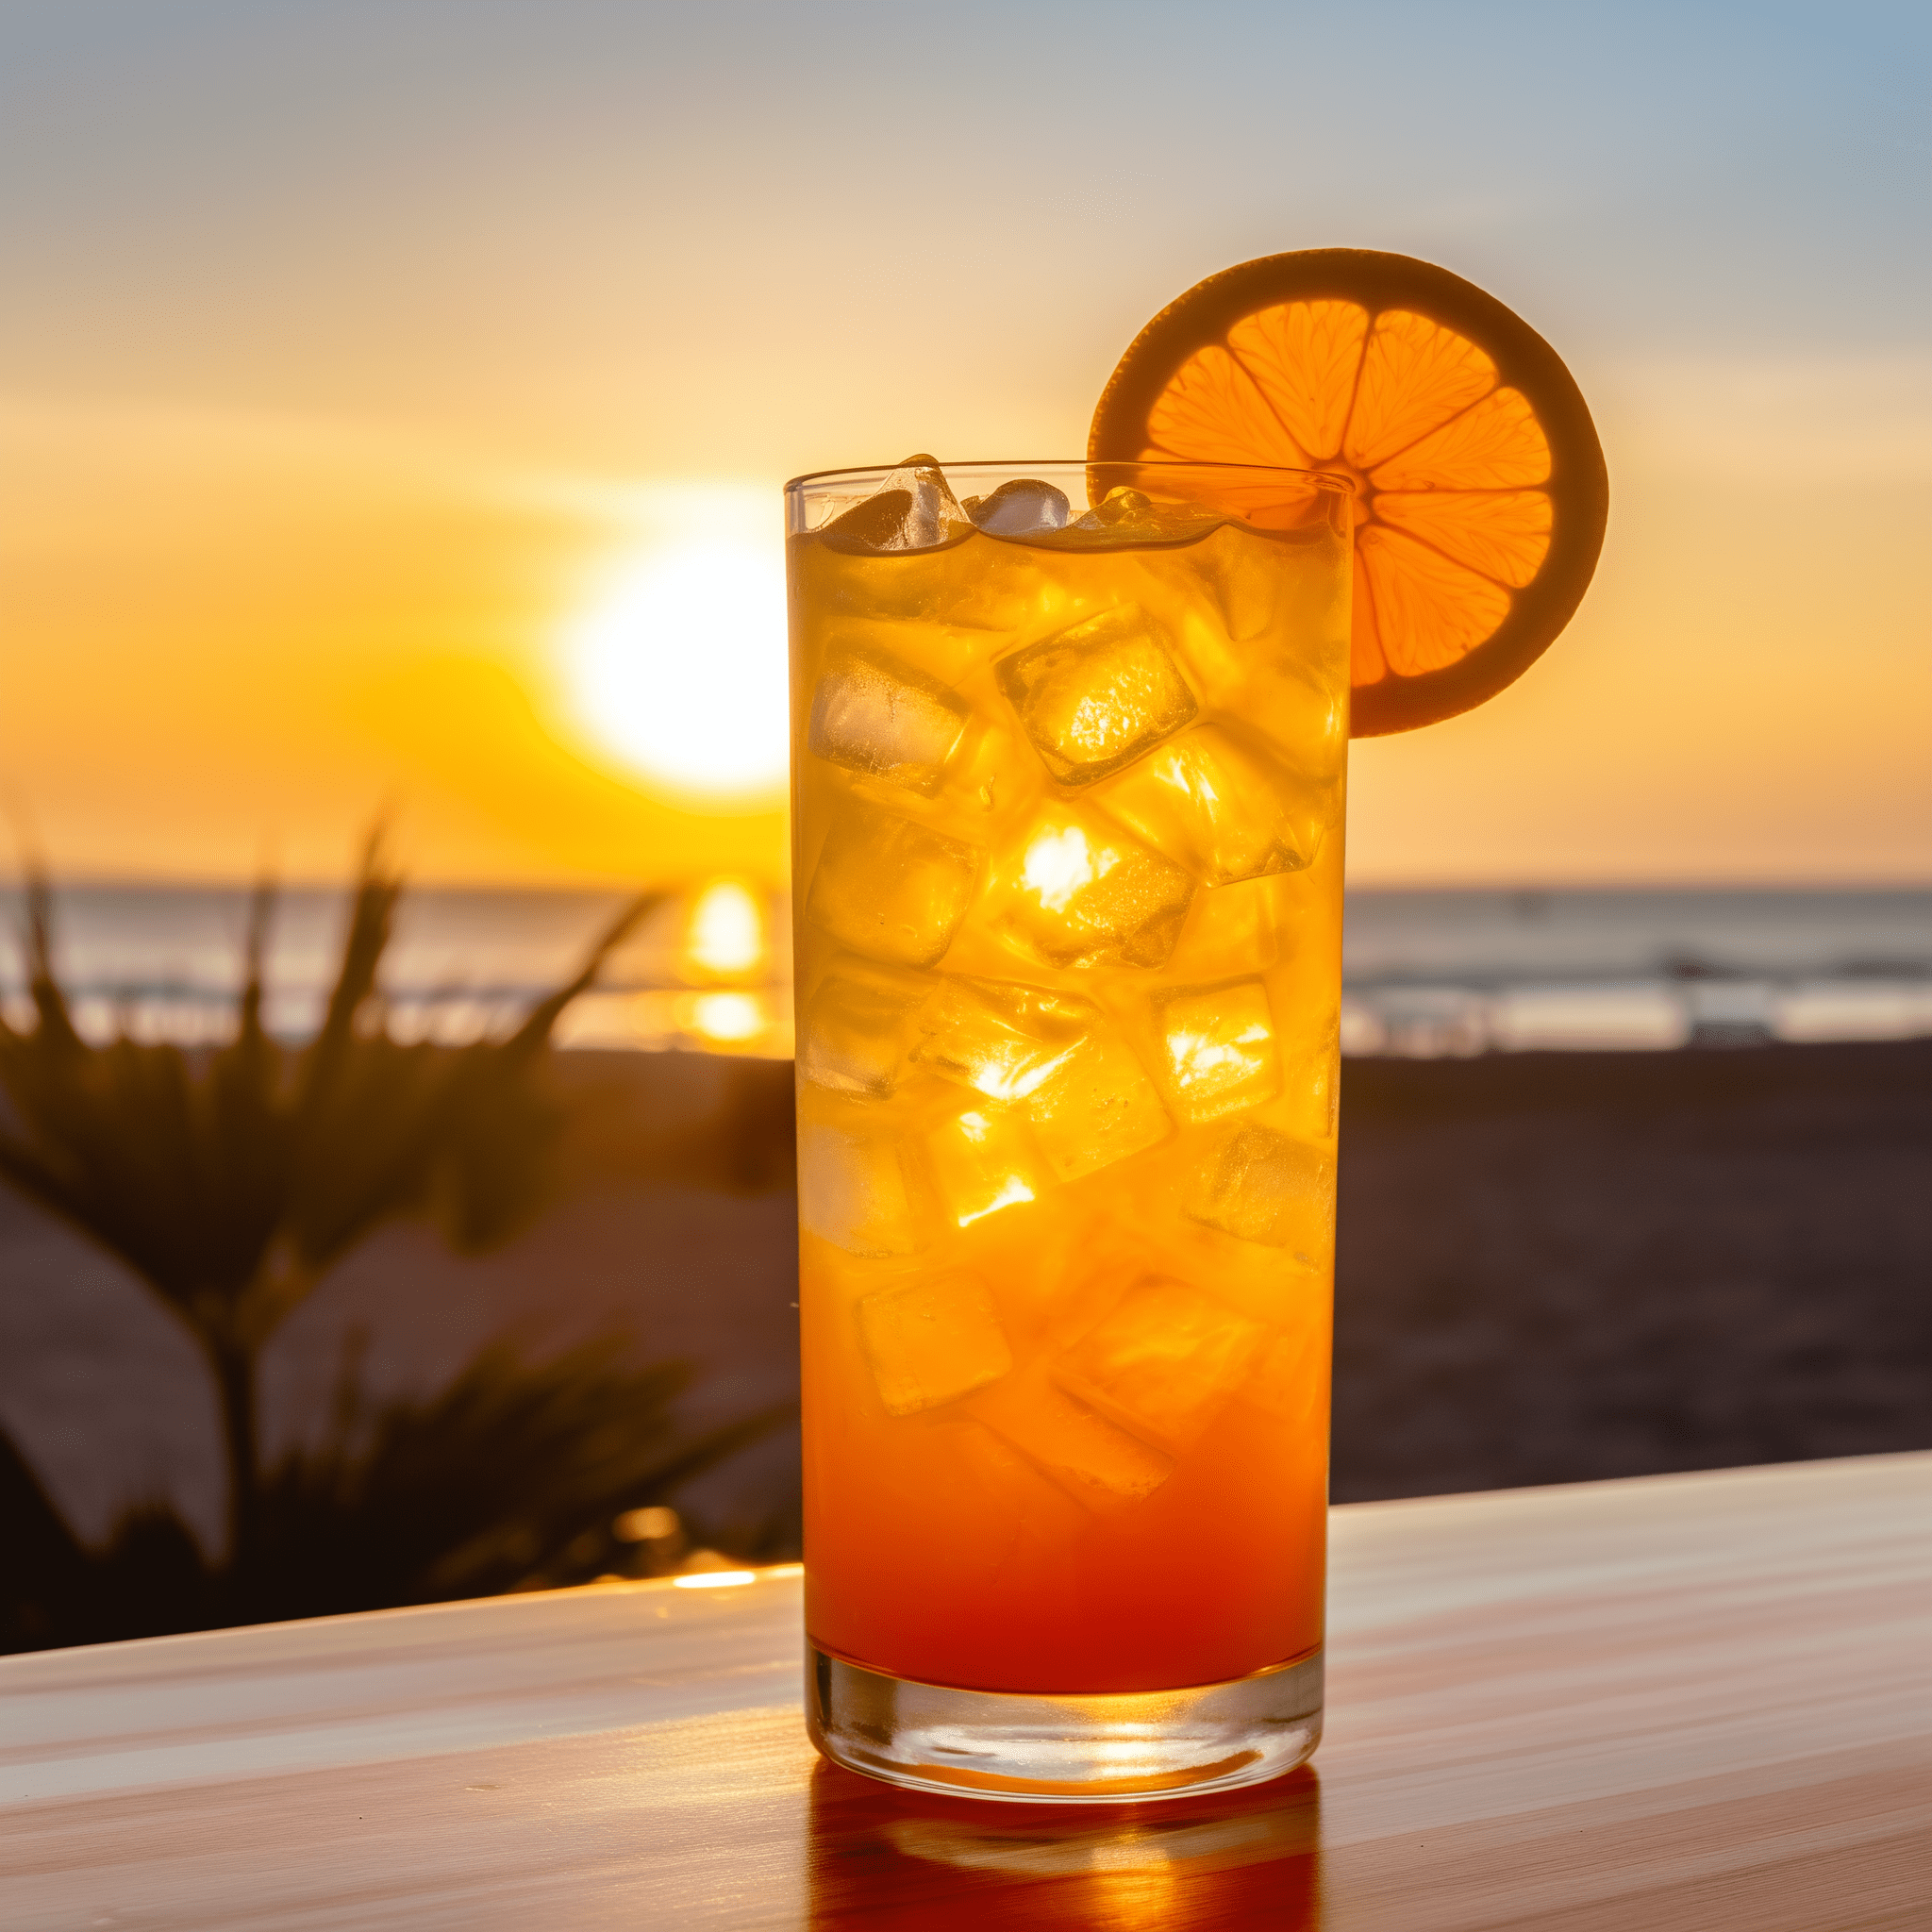 Sunset Rum Fizz Cocktail Recipe - The Sunset Rum Fizz offers a delightful balance of sweetness from the orange soda and the robust flavors of rum. It's effervescent, fruity, and has a light caramel undertone from the rum, making it an easy-drinking cocktail with a tropical flair.